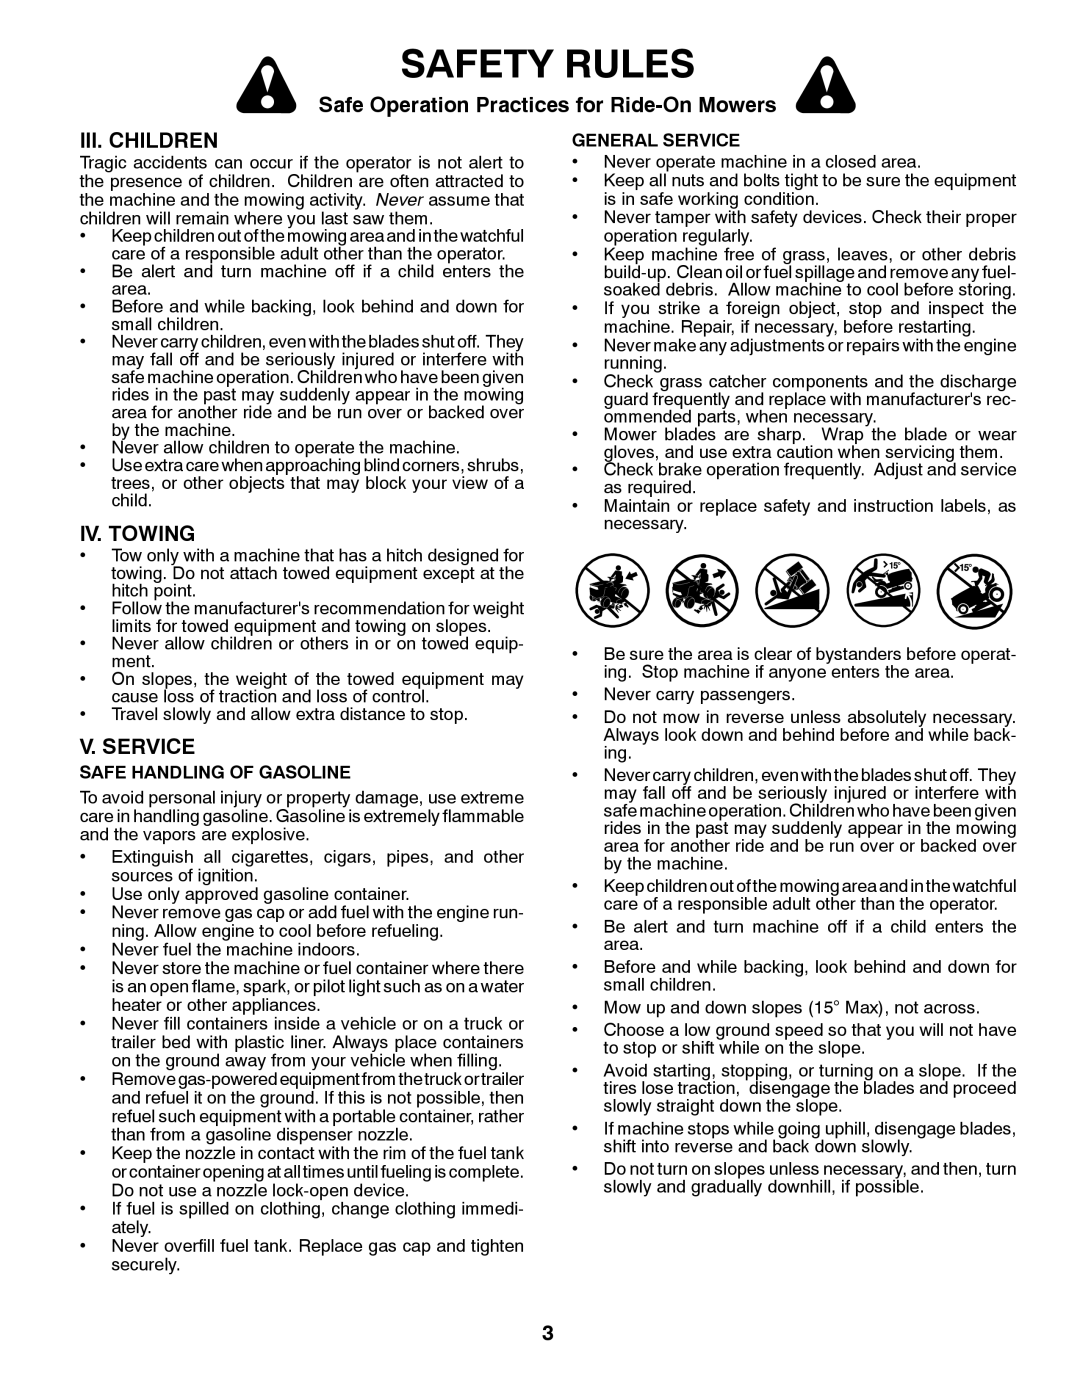 Poulan 412412 manual Iii. Children, Iv. Towing, V. Service, Safety Rules, Safe Operation Practices for Ride-On Mowers 